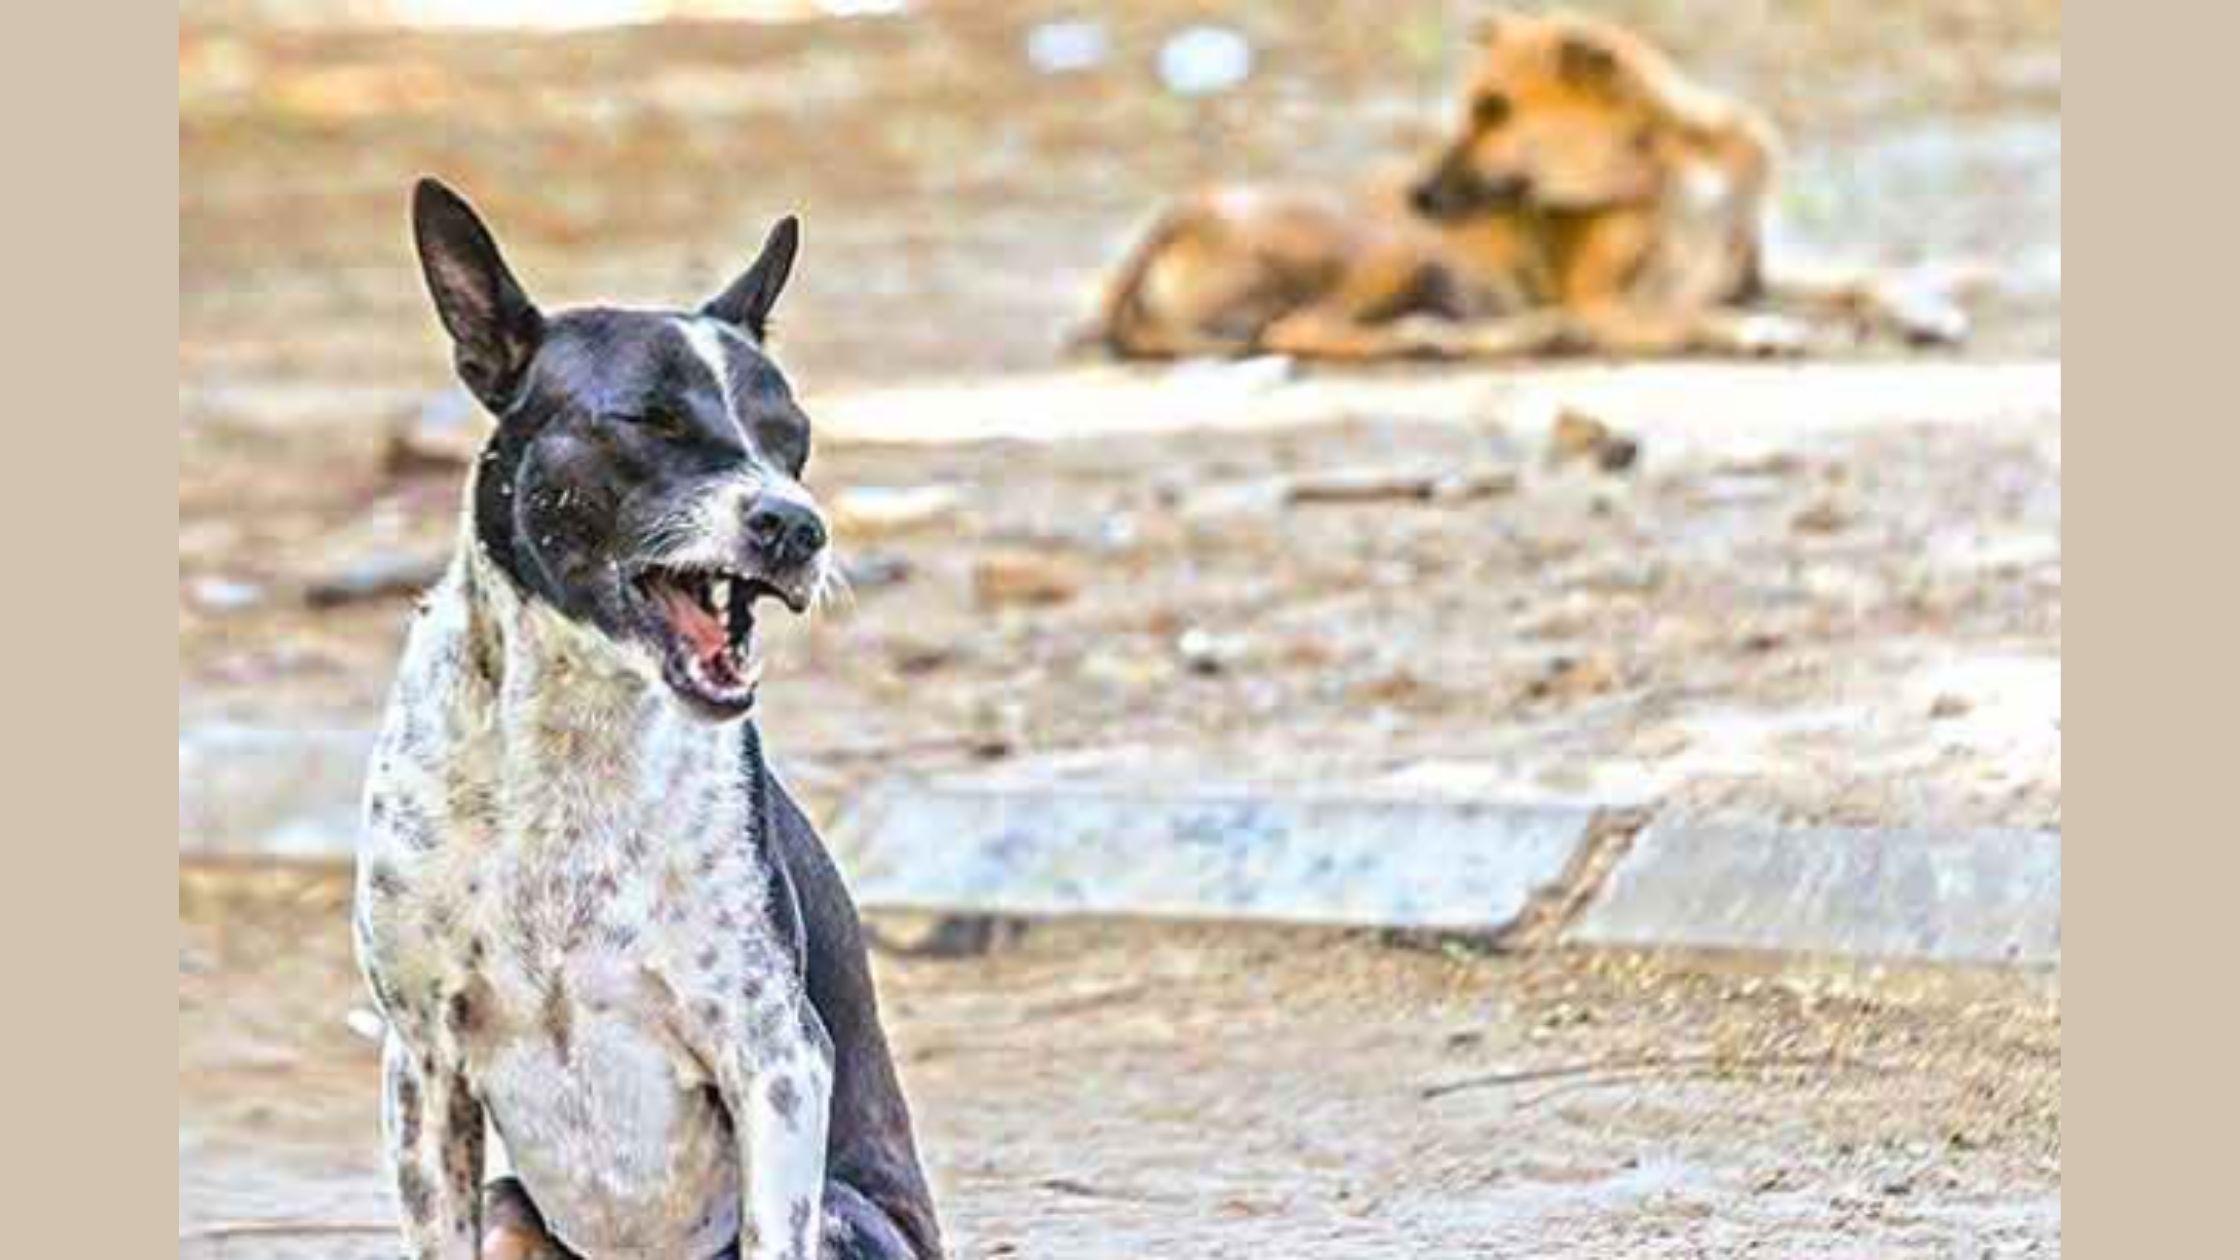 Adopt Indian dogs: PETA India’s new campaign